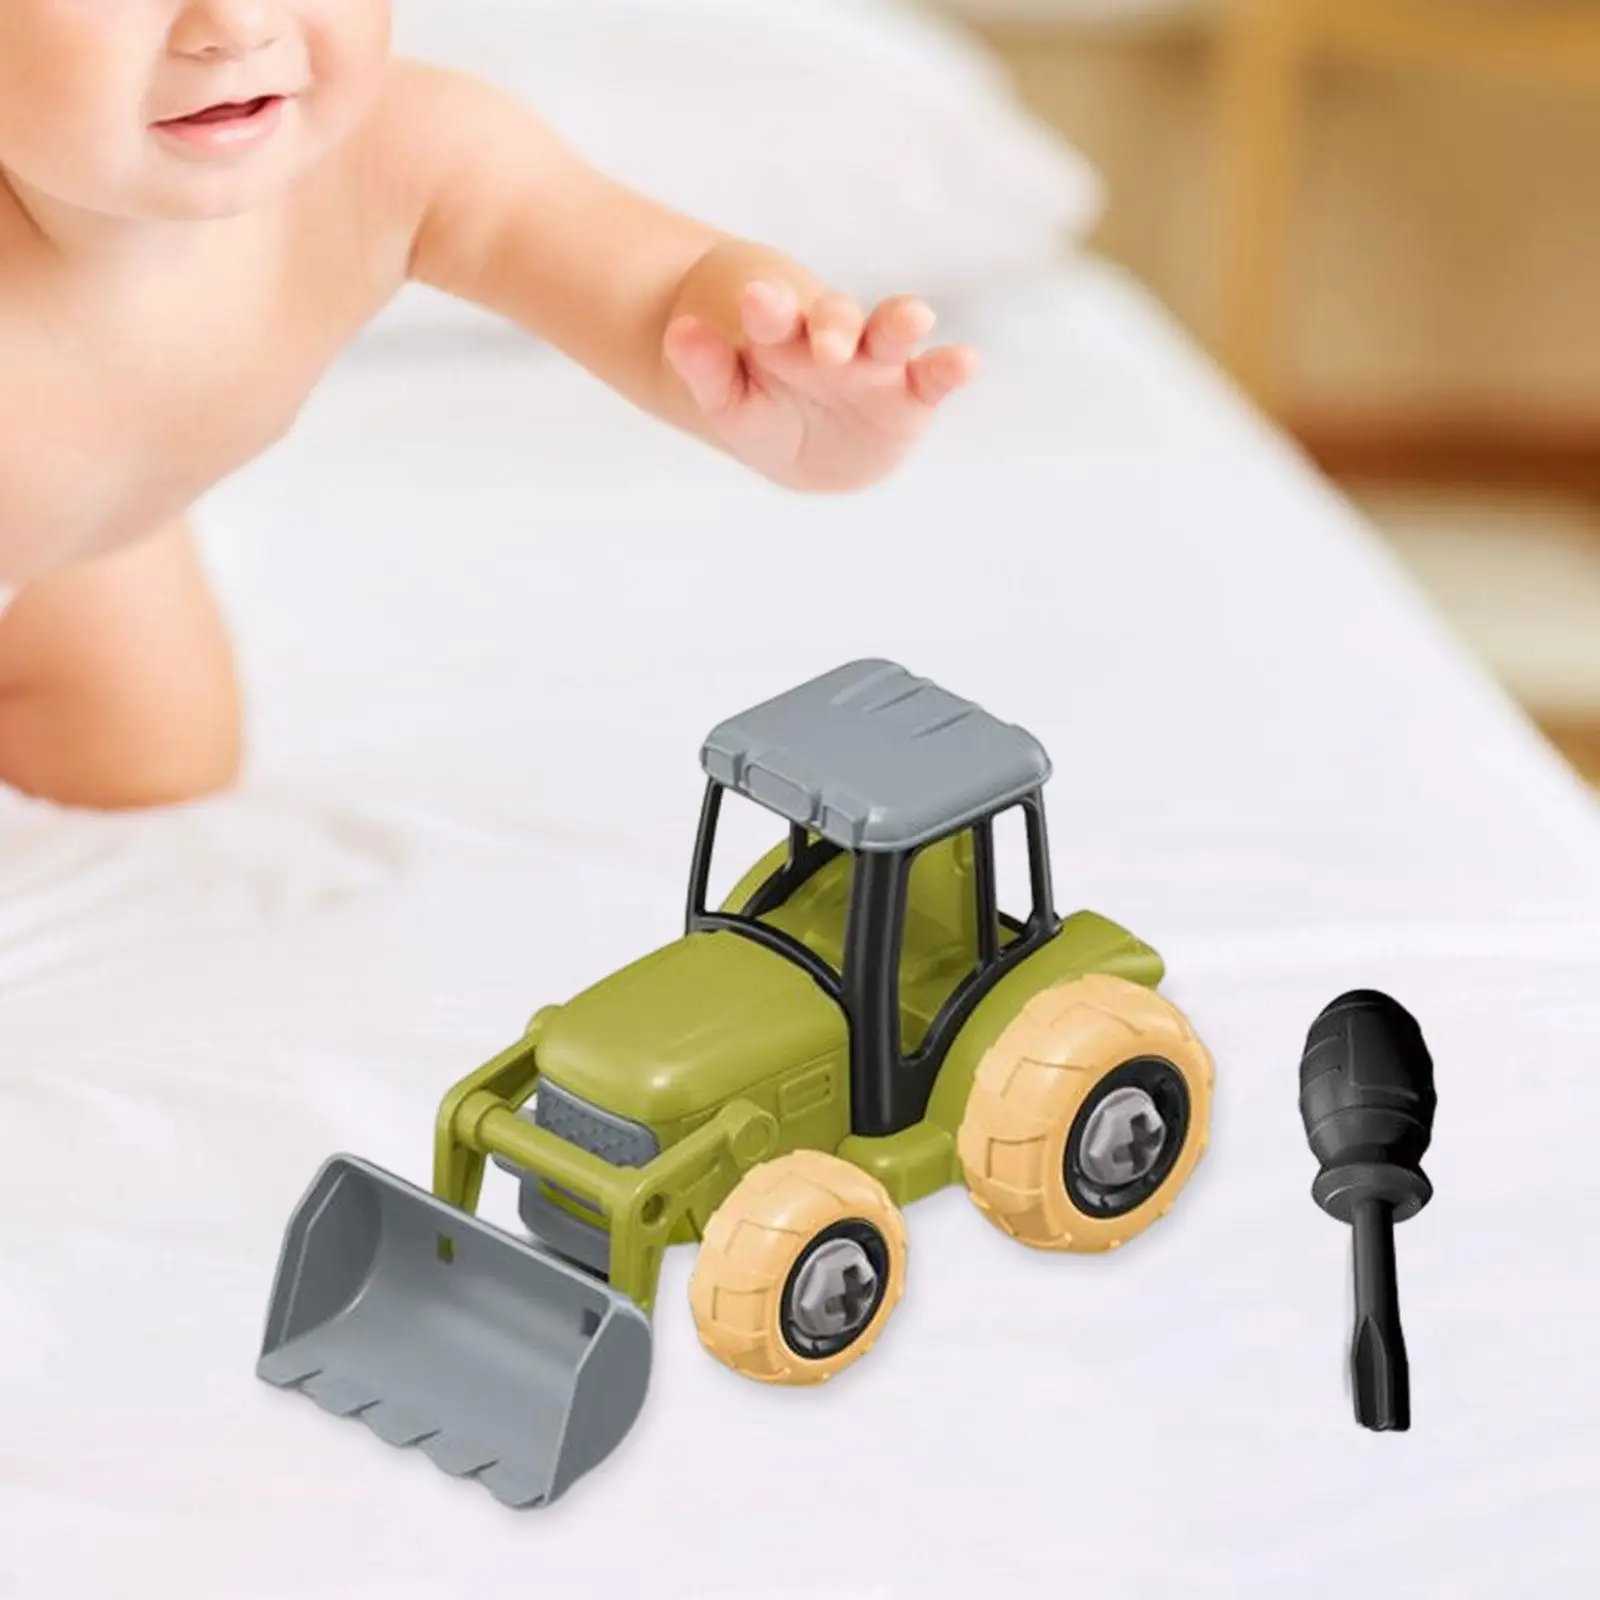 Take Apart Truck Car Toys Hands on Ability Educational with Screwdriver for 3 4 5 6 7 Year Old Girls Boys Kids Preschool